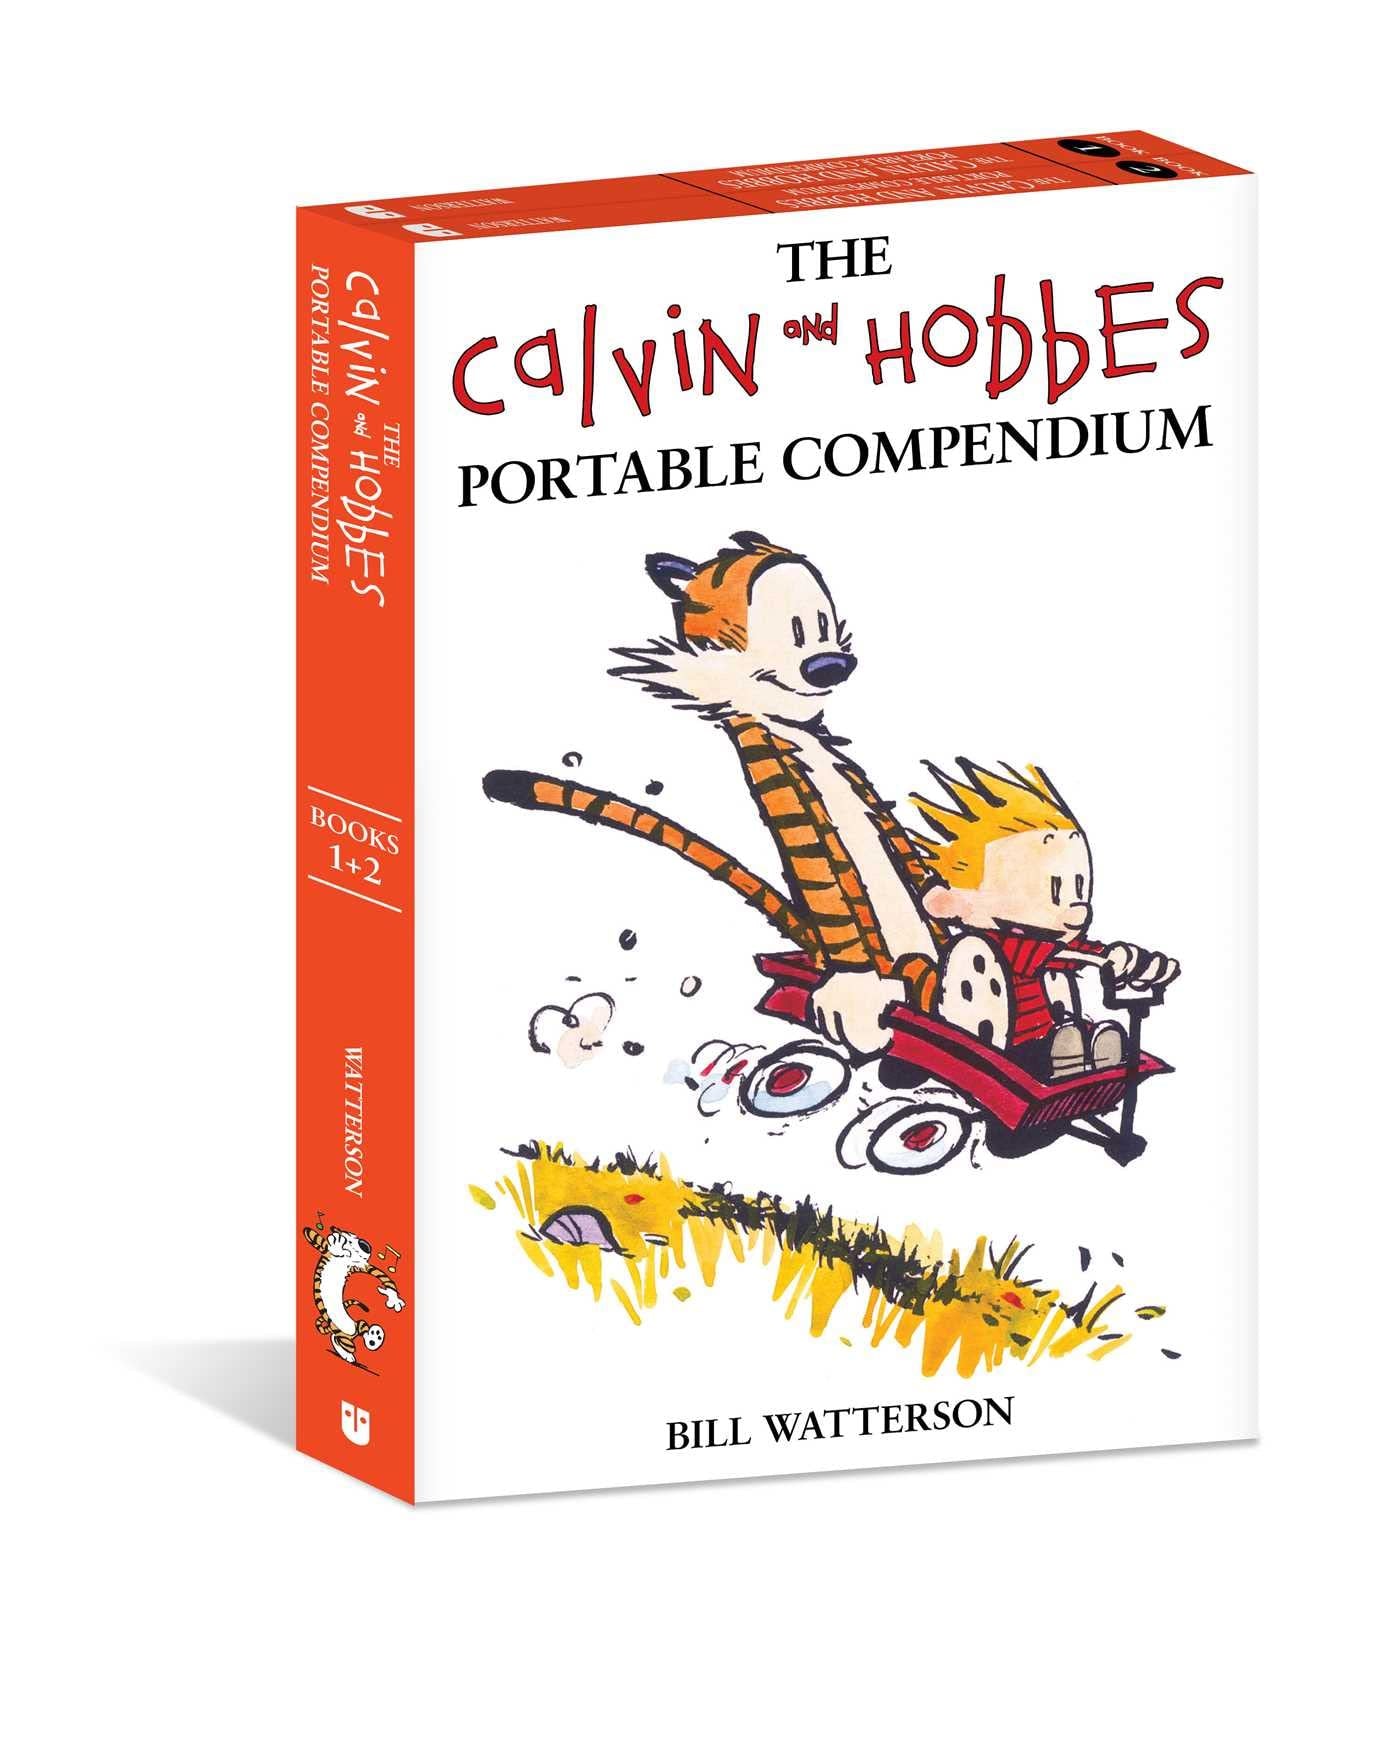 THE CALVIN AND HOBBES PORTABLE COMPENDIUM BOOKS 1 & 2